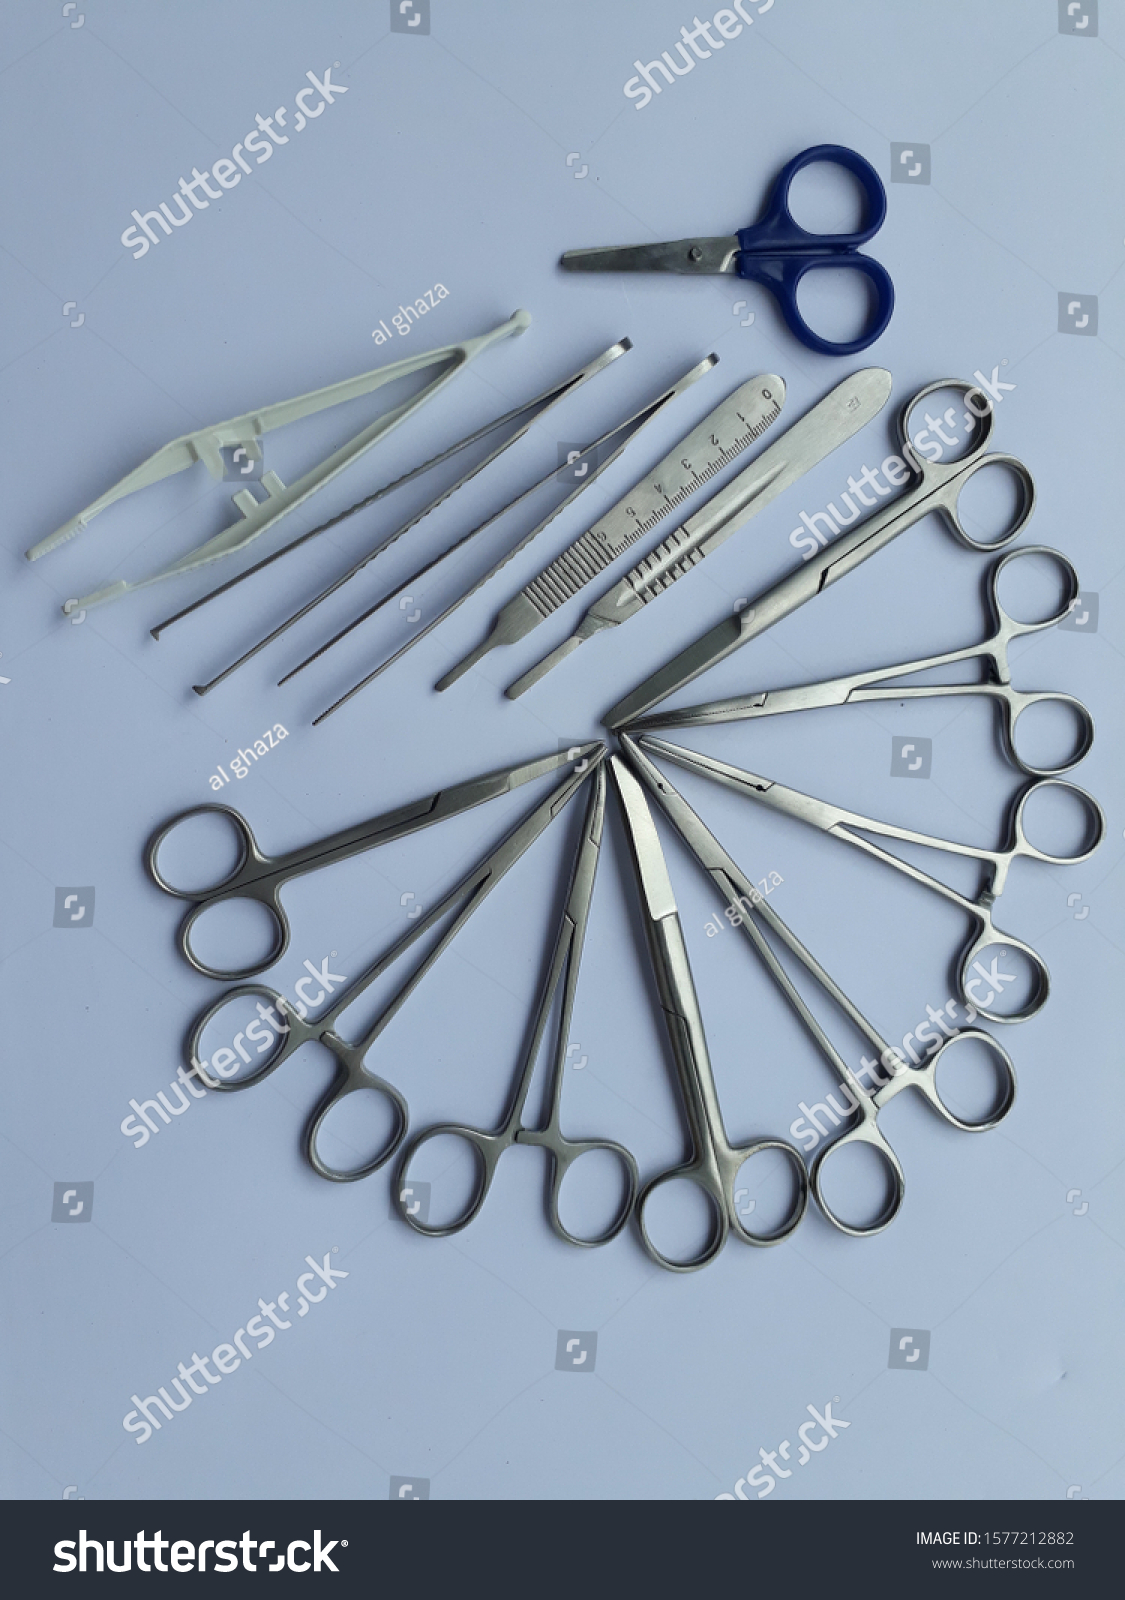 Hecting set is a set of instruments used for sewing or treating wounds. #1577212882